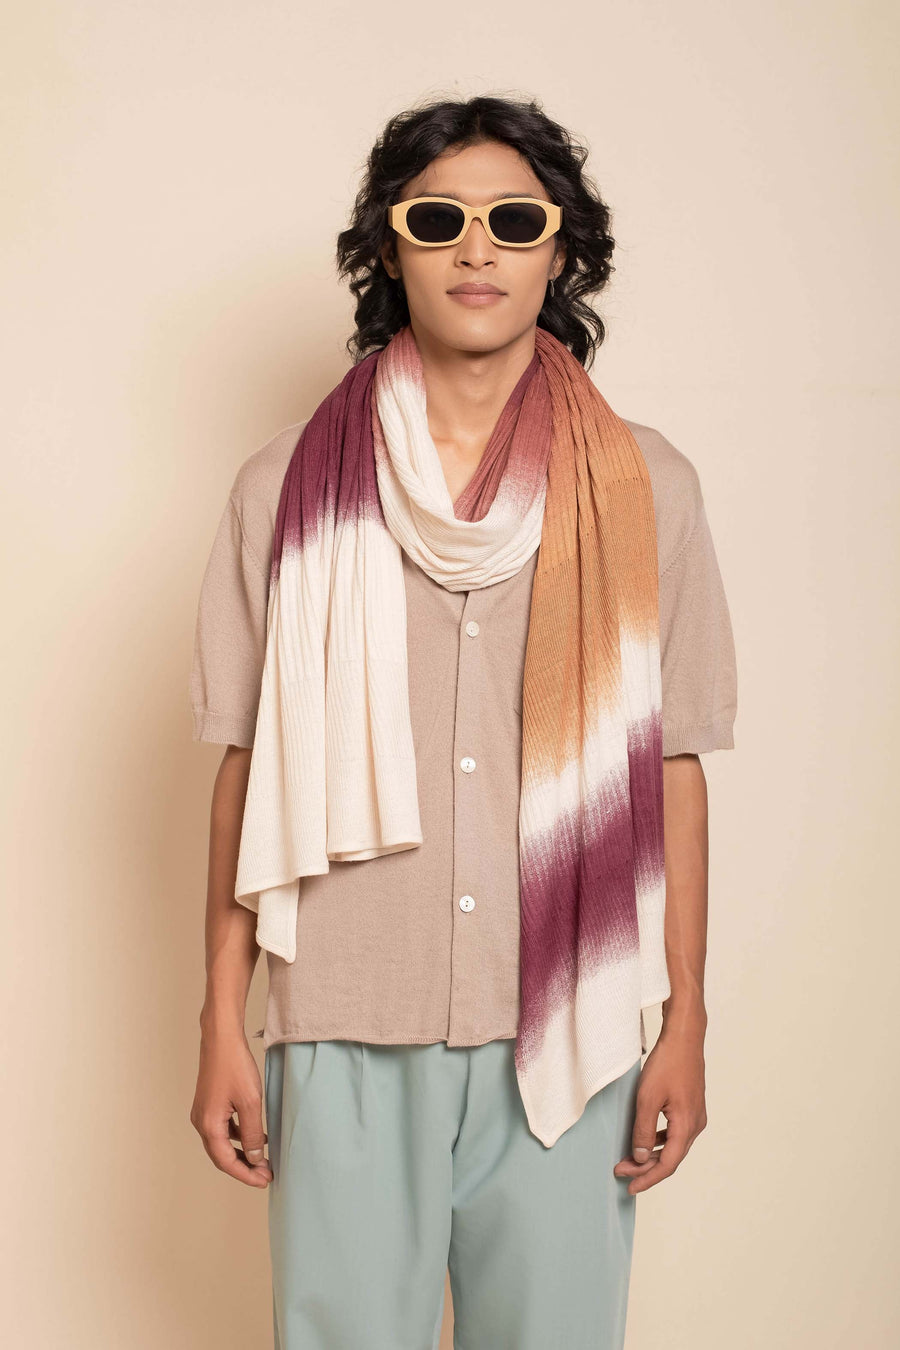 Formal Printed Ombre Stripes Unisex Scarf